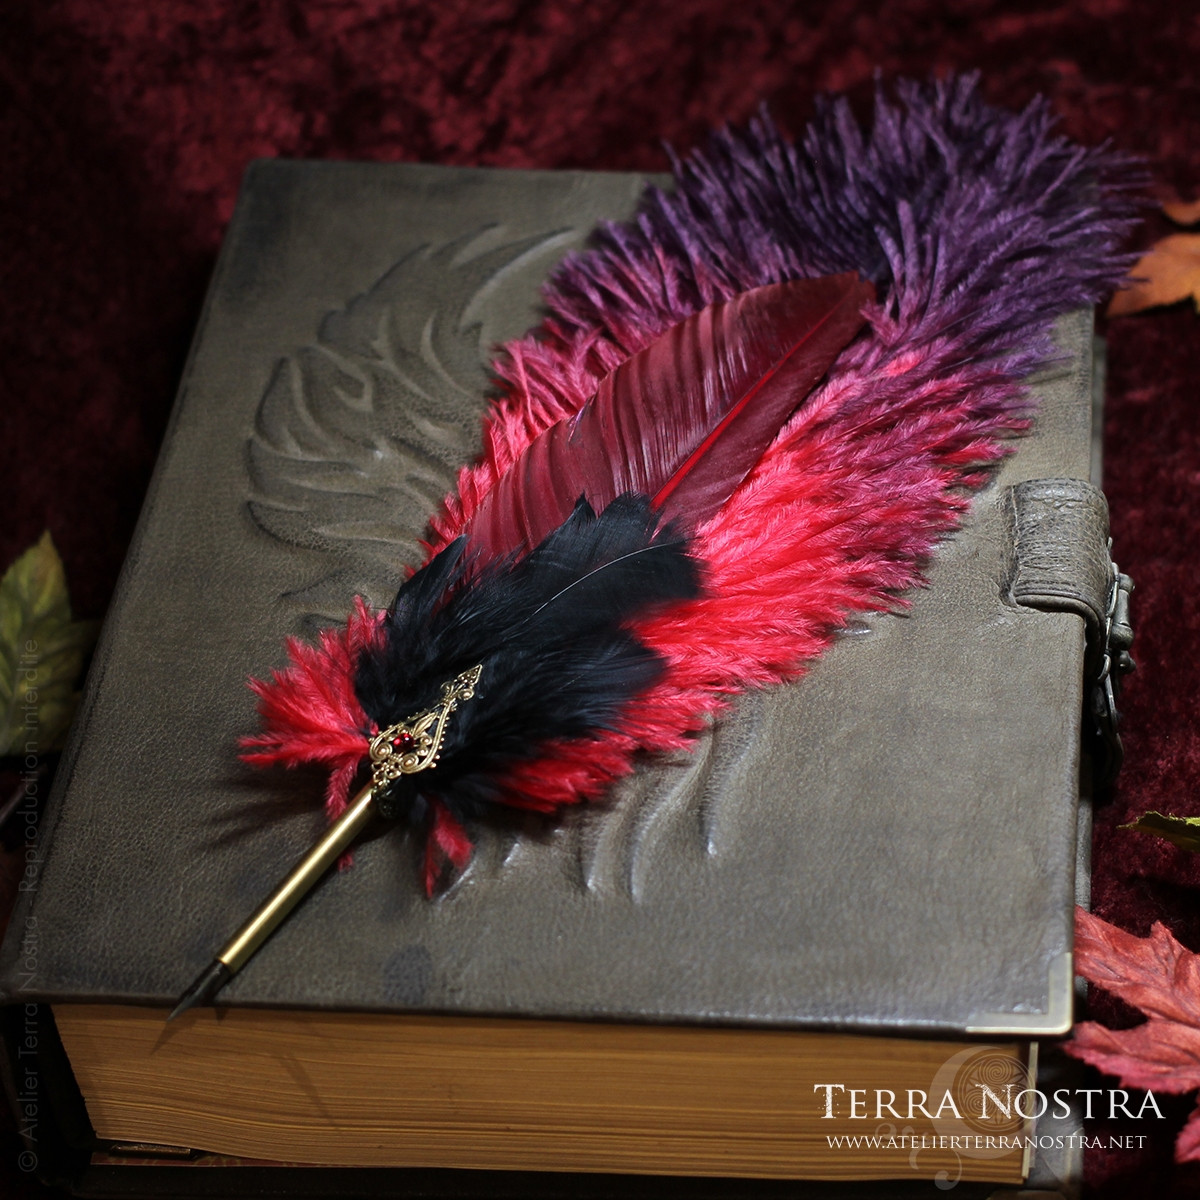 copy of "The Green Path" feather quill